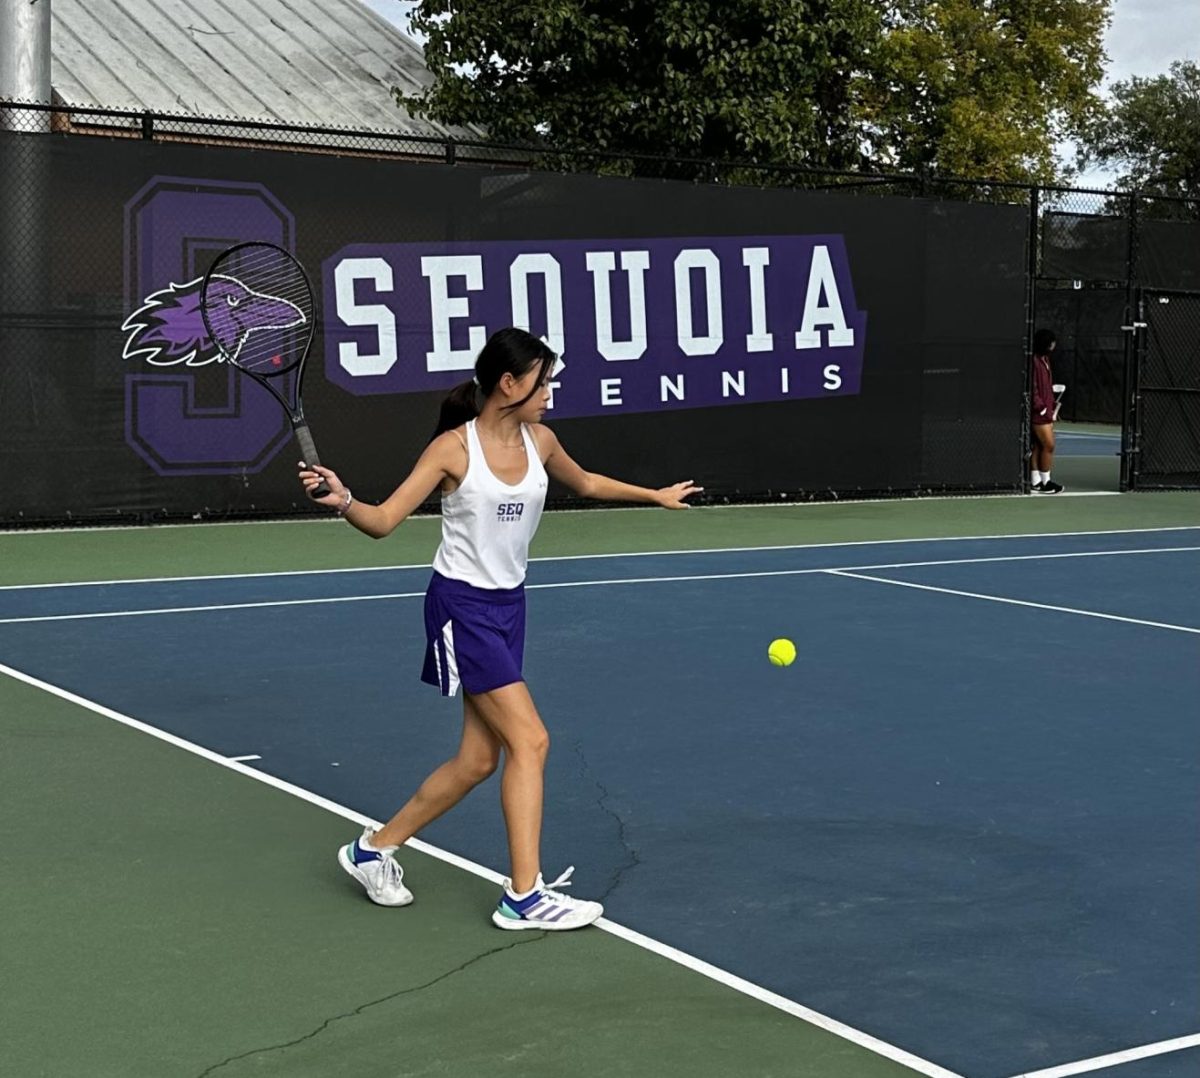 Sequoia tennis rallies their way into the Bay Division